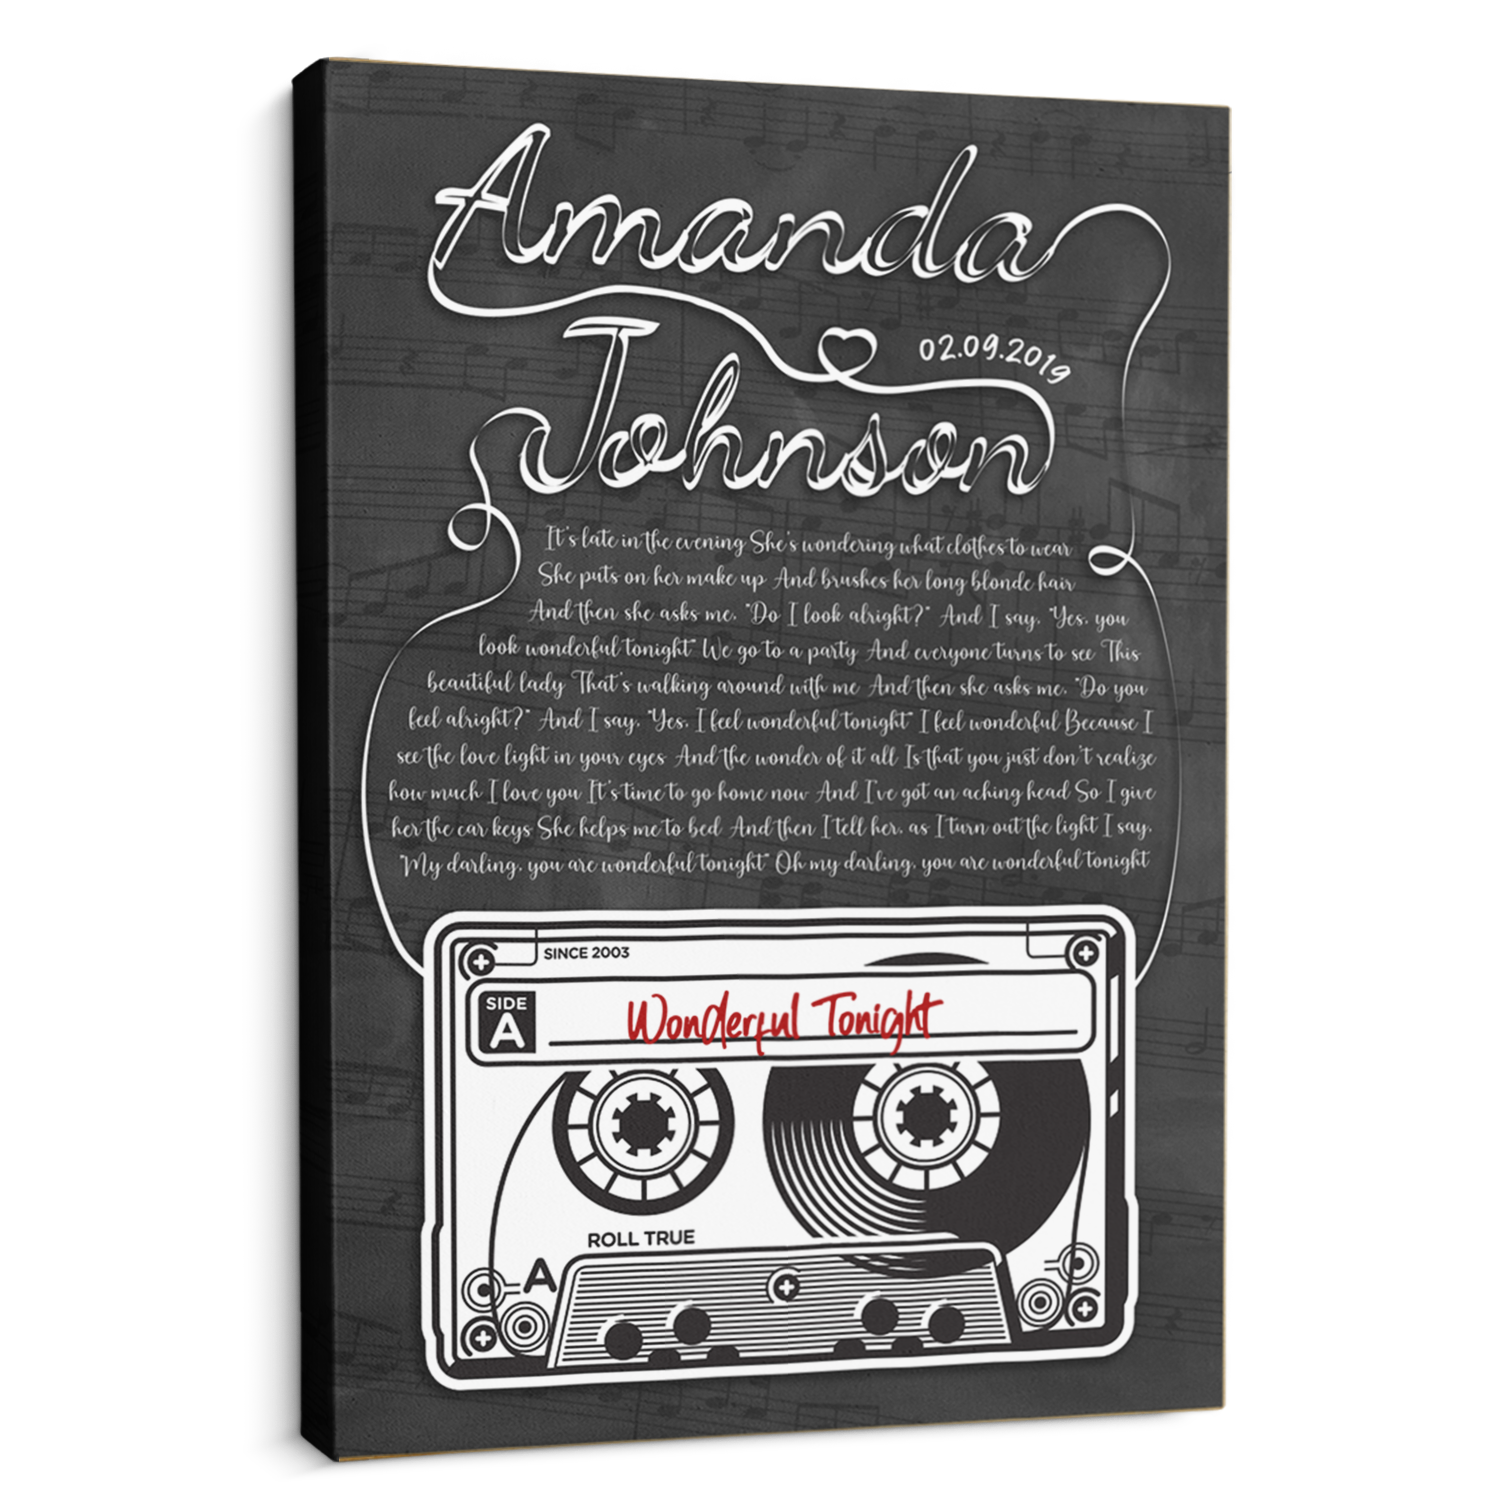 Custom Song Lyrics, Customizable Name And Date, Cassette Tape Black Background Canvas